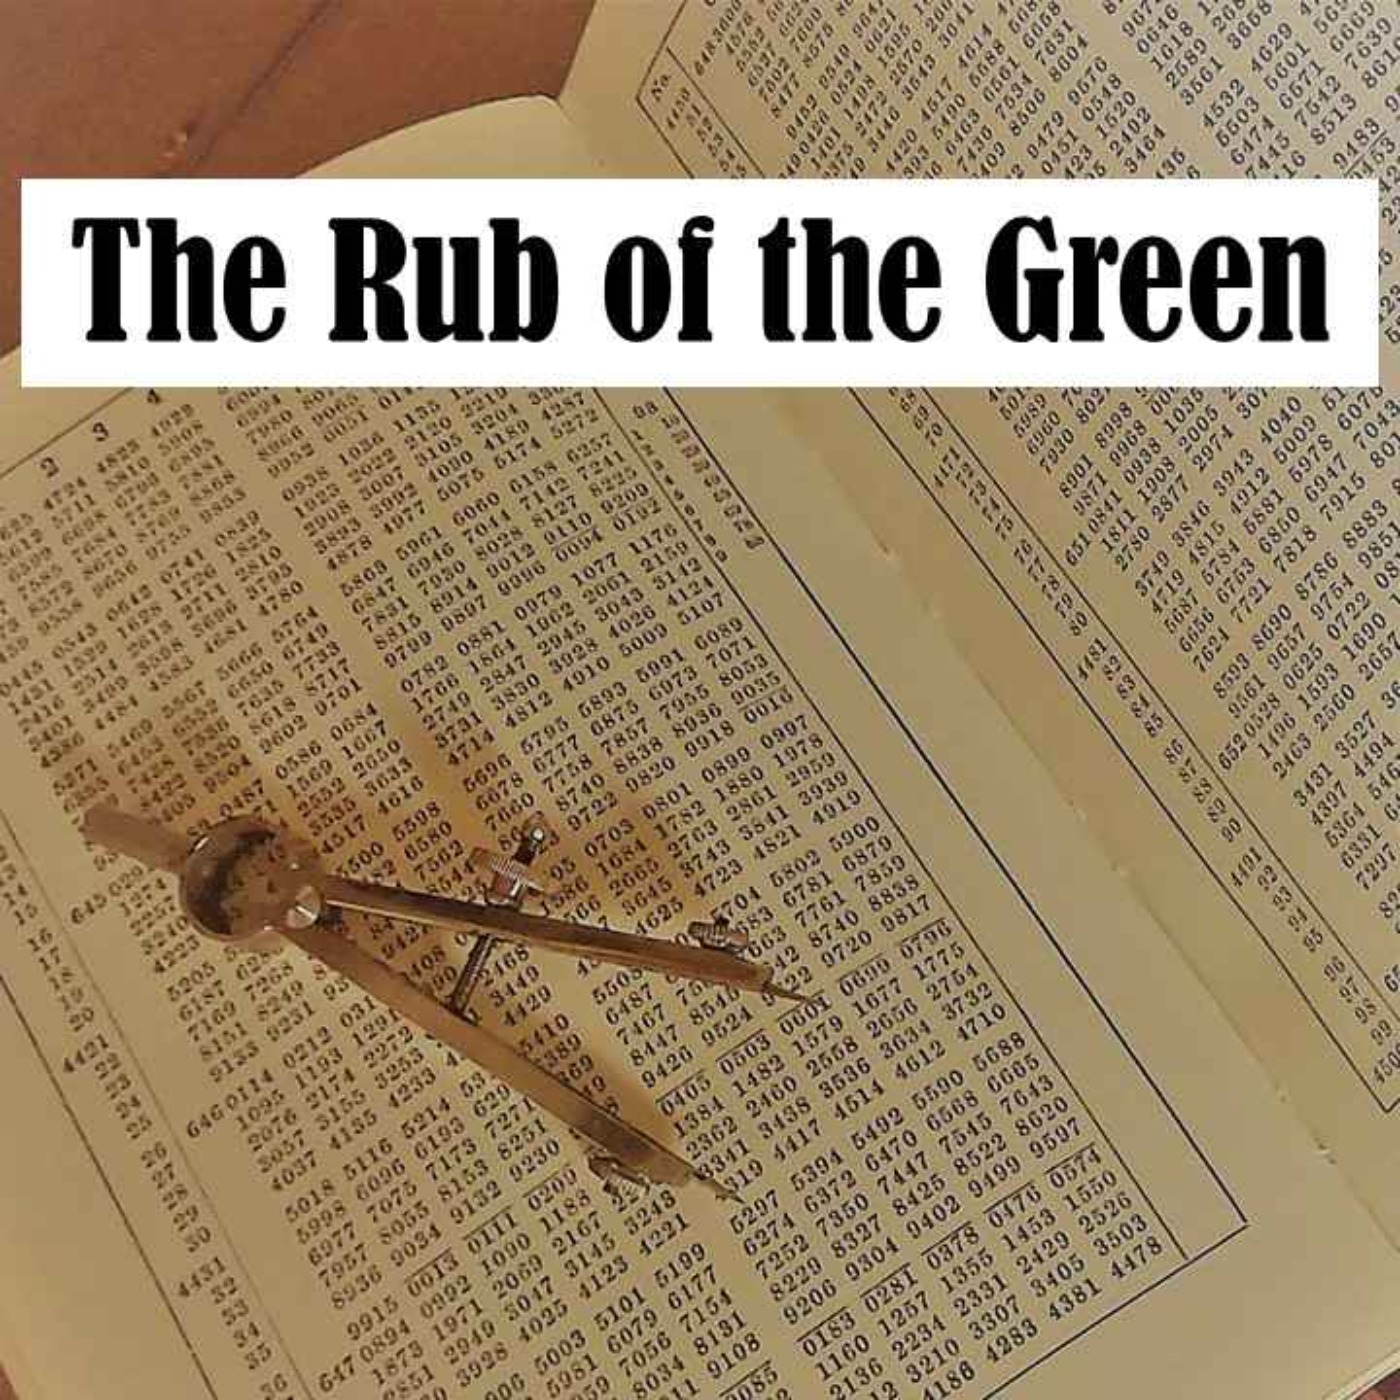 The Quiet Men of England Episode 4: The Rub of the Green